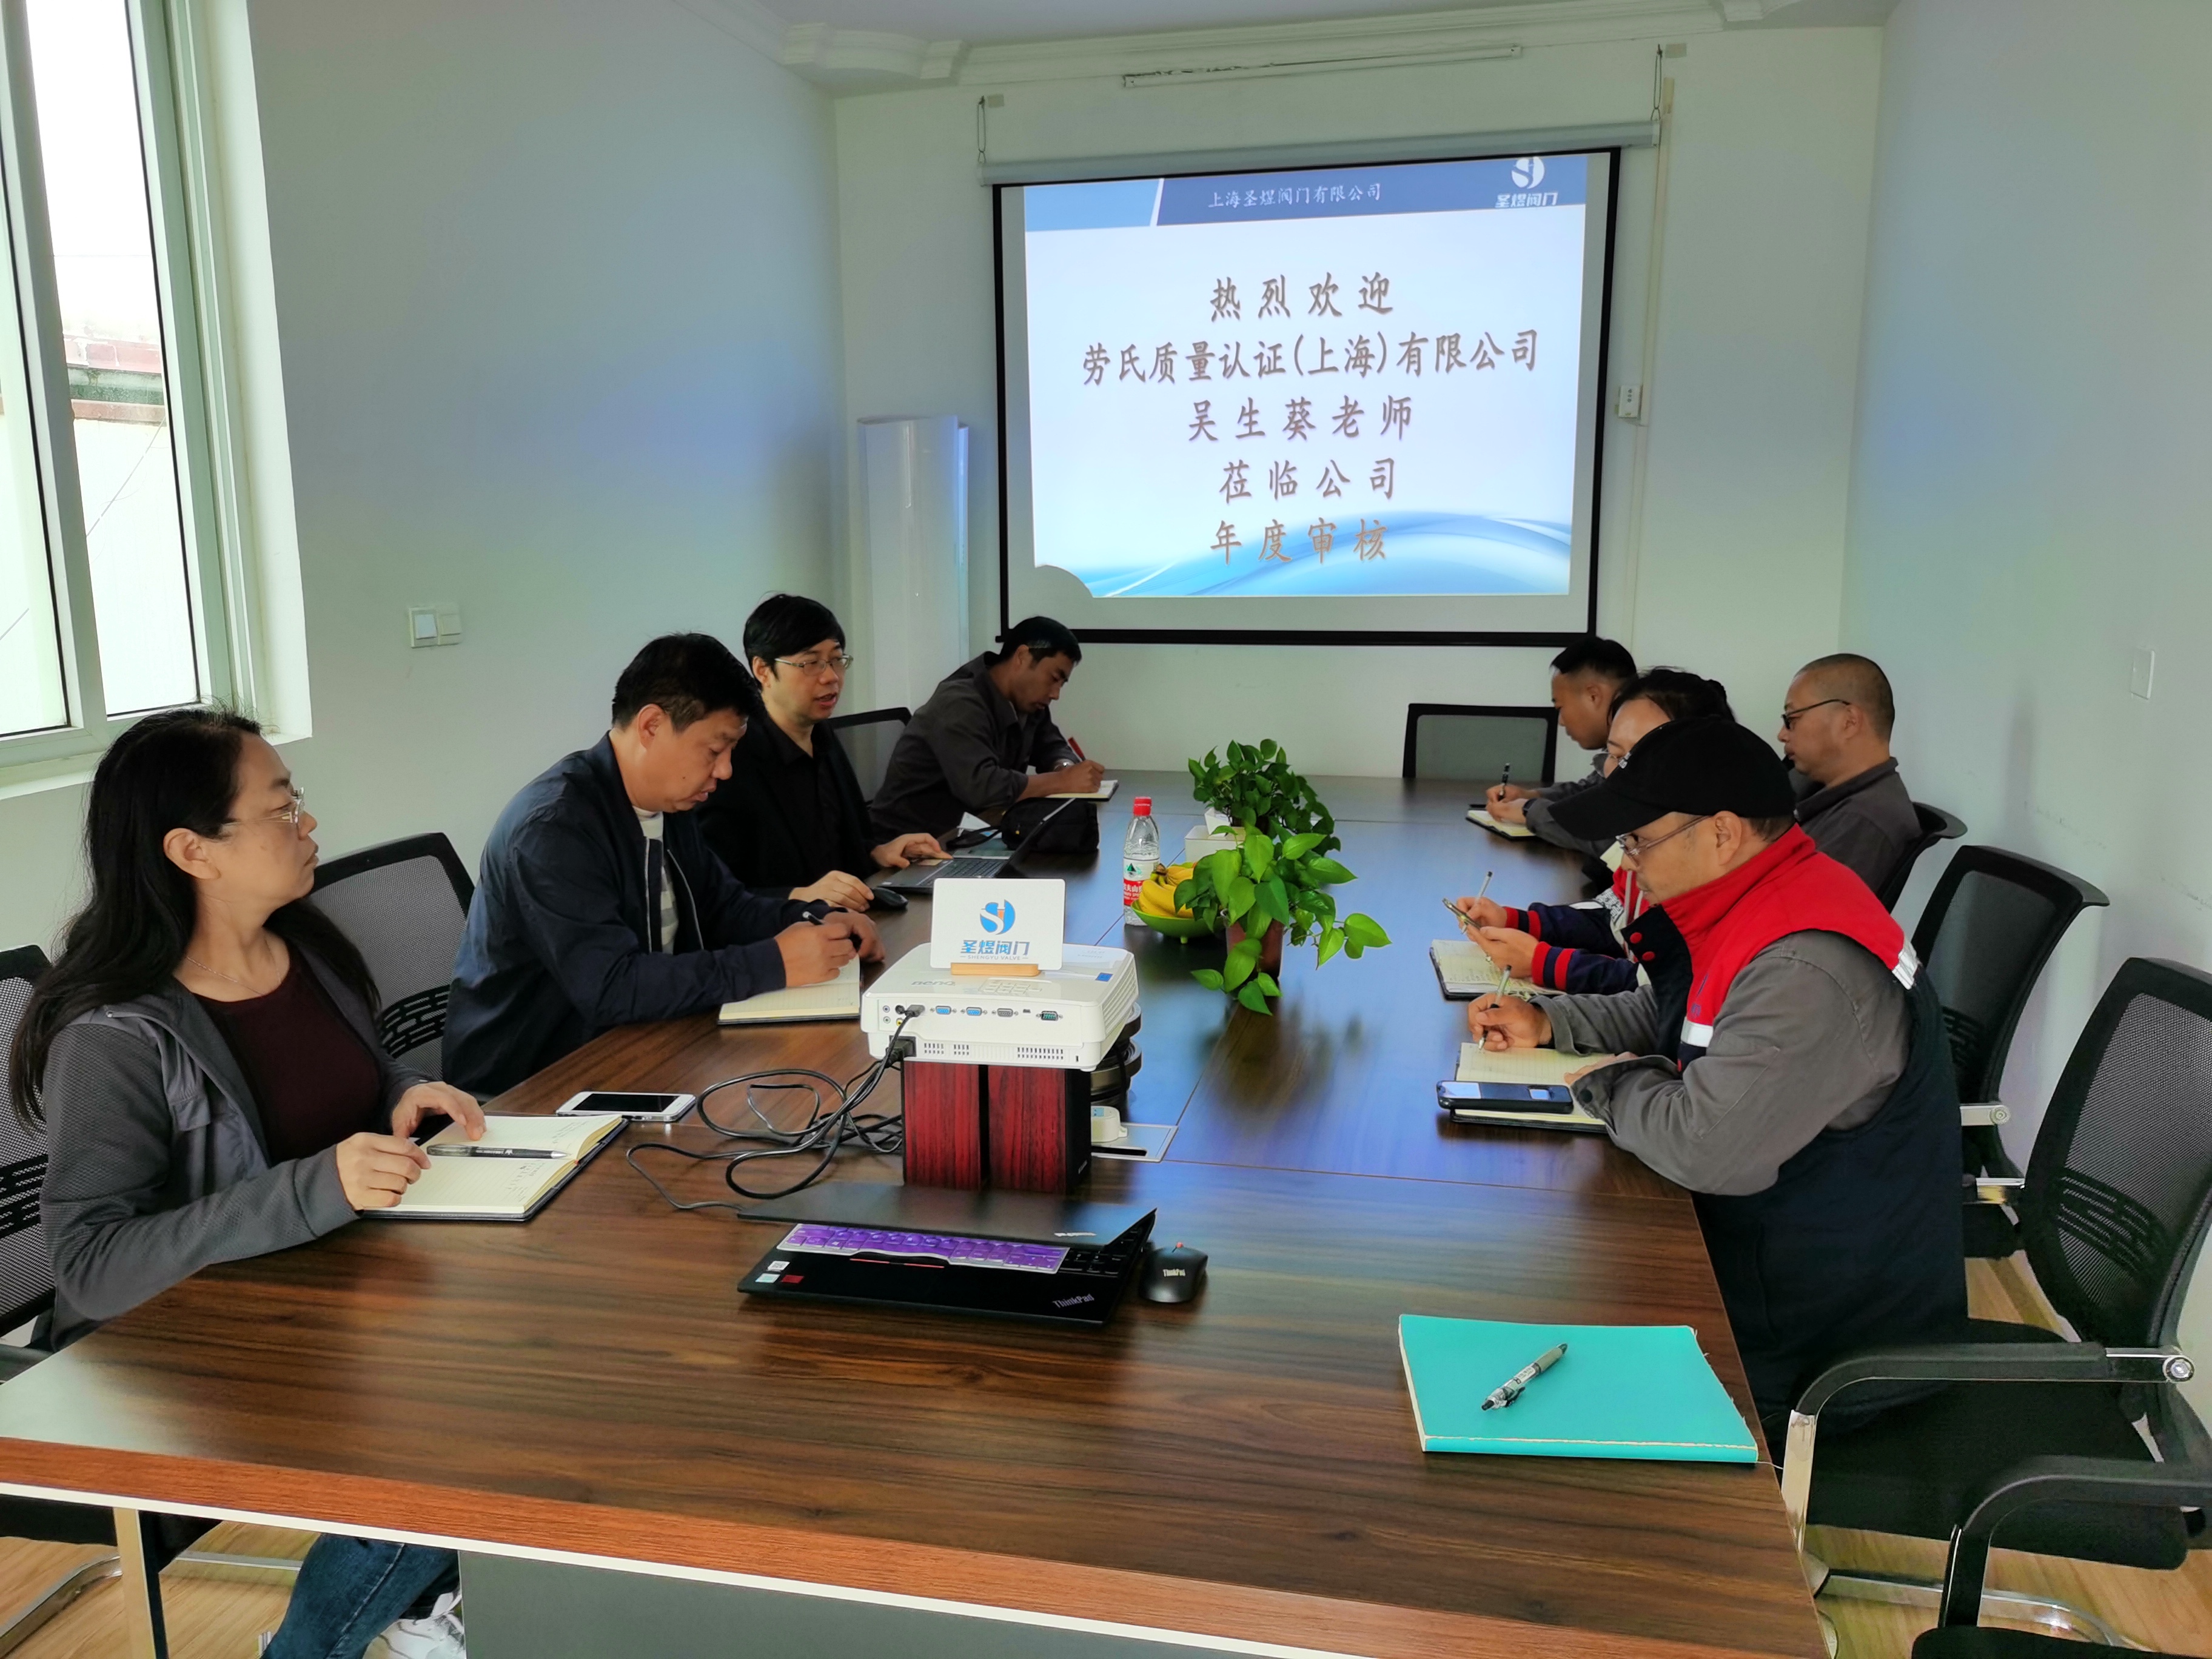 Shengyu Valve Company successfully passed the 2022 annual supervision and audit of ISO9001 Management System and CE-PED Certificate